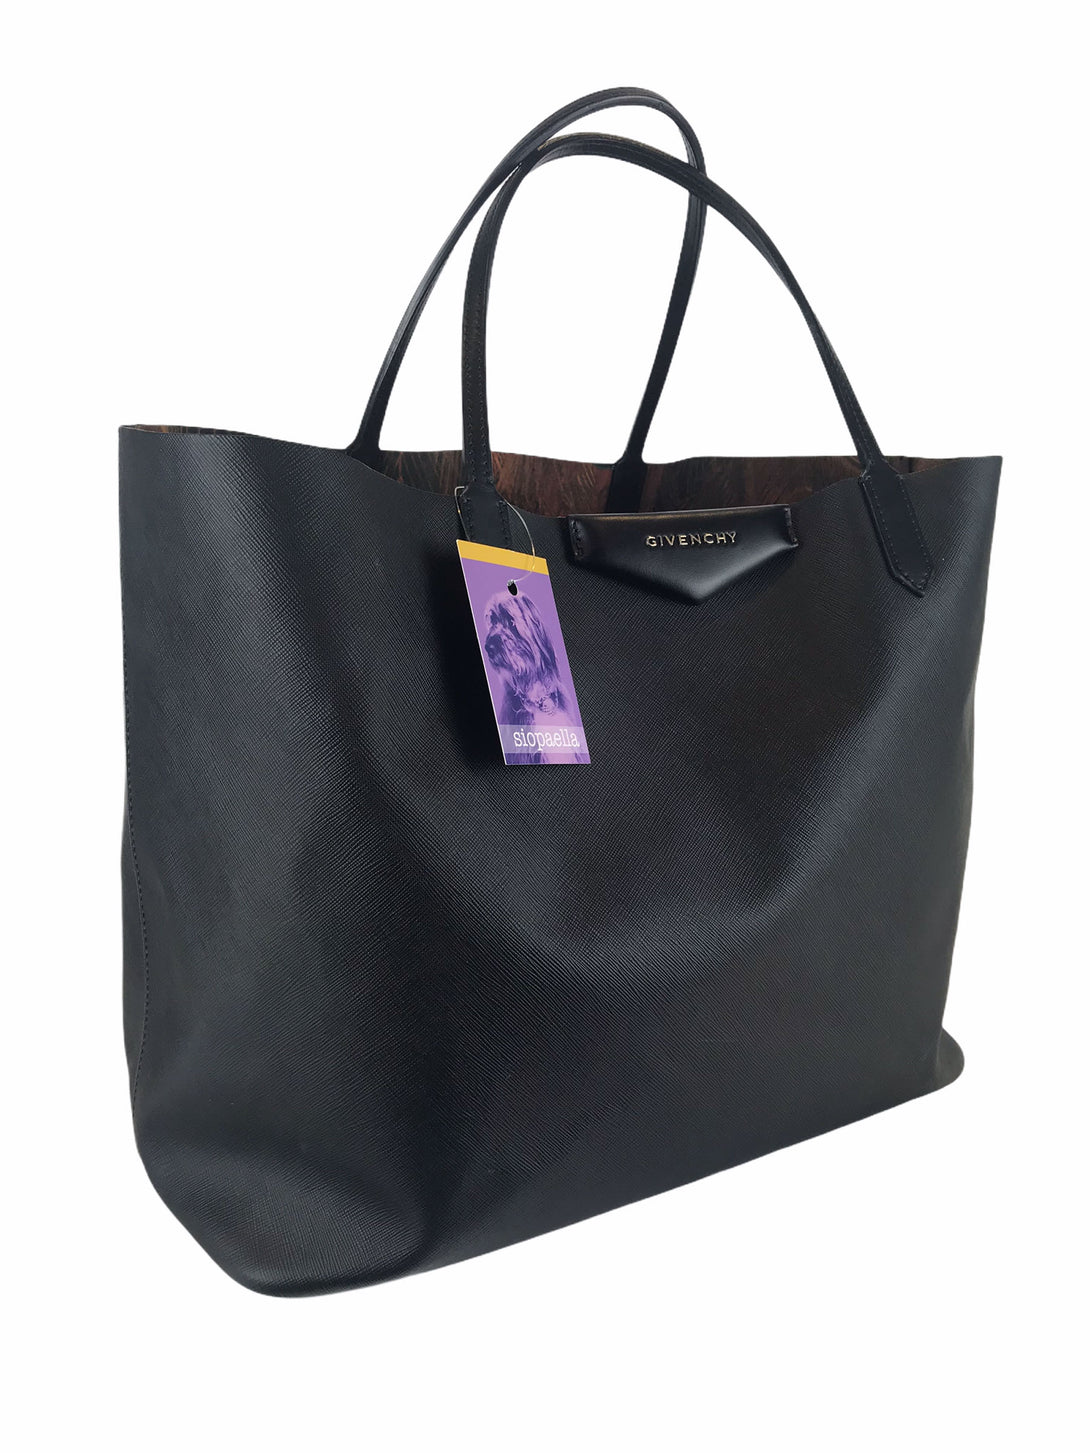 Givenchy Black Leather Tote - Siopaella Designer Exchange